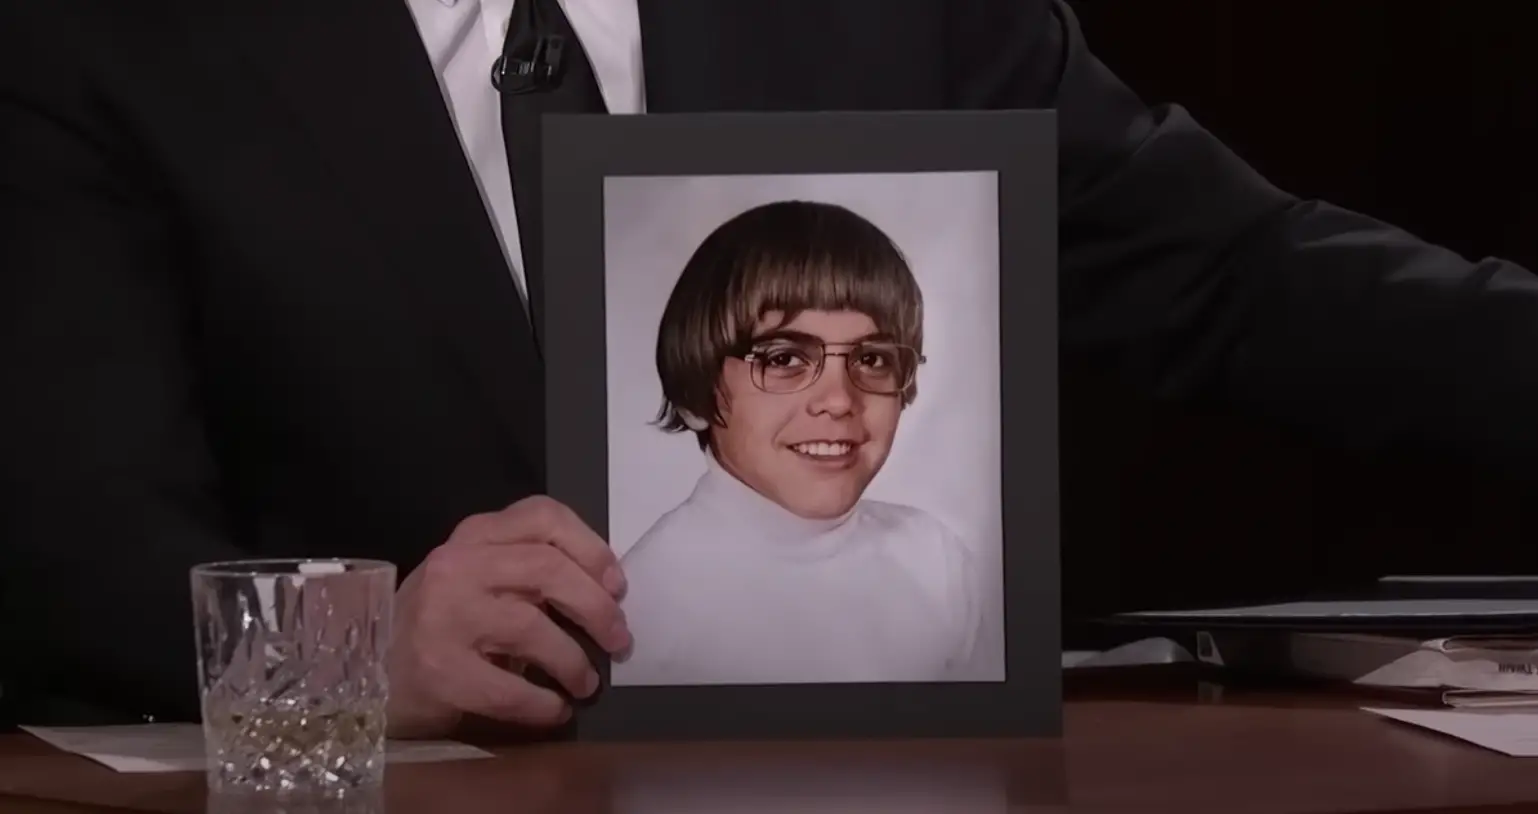 George Clooney as a young boy | Source: Youtube.com/Jimmy Kimmel Live